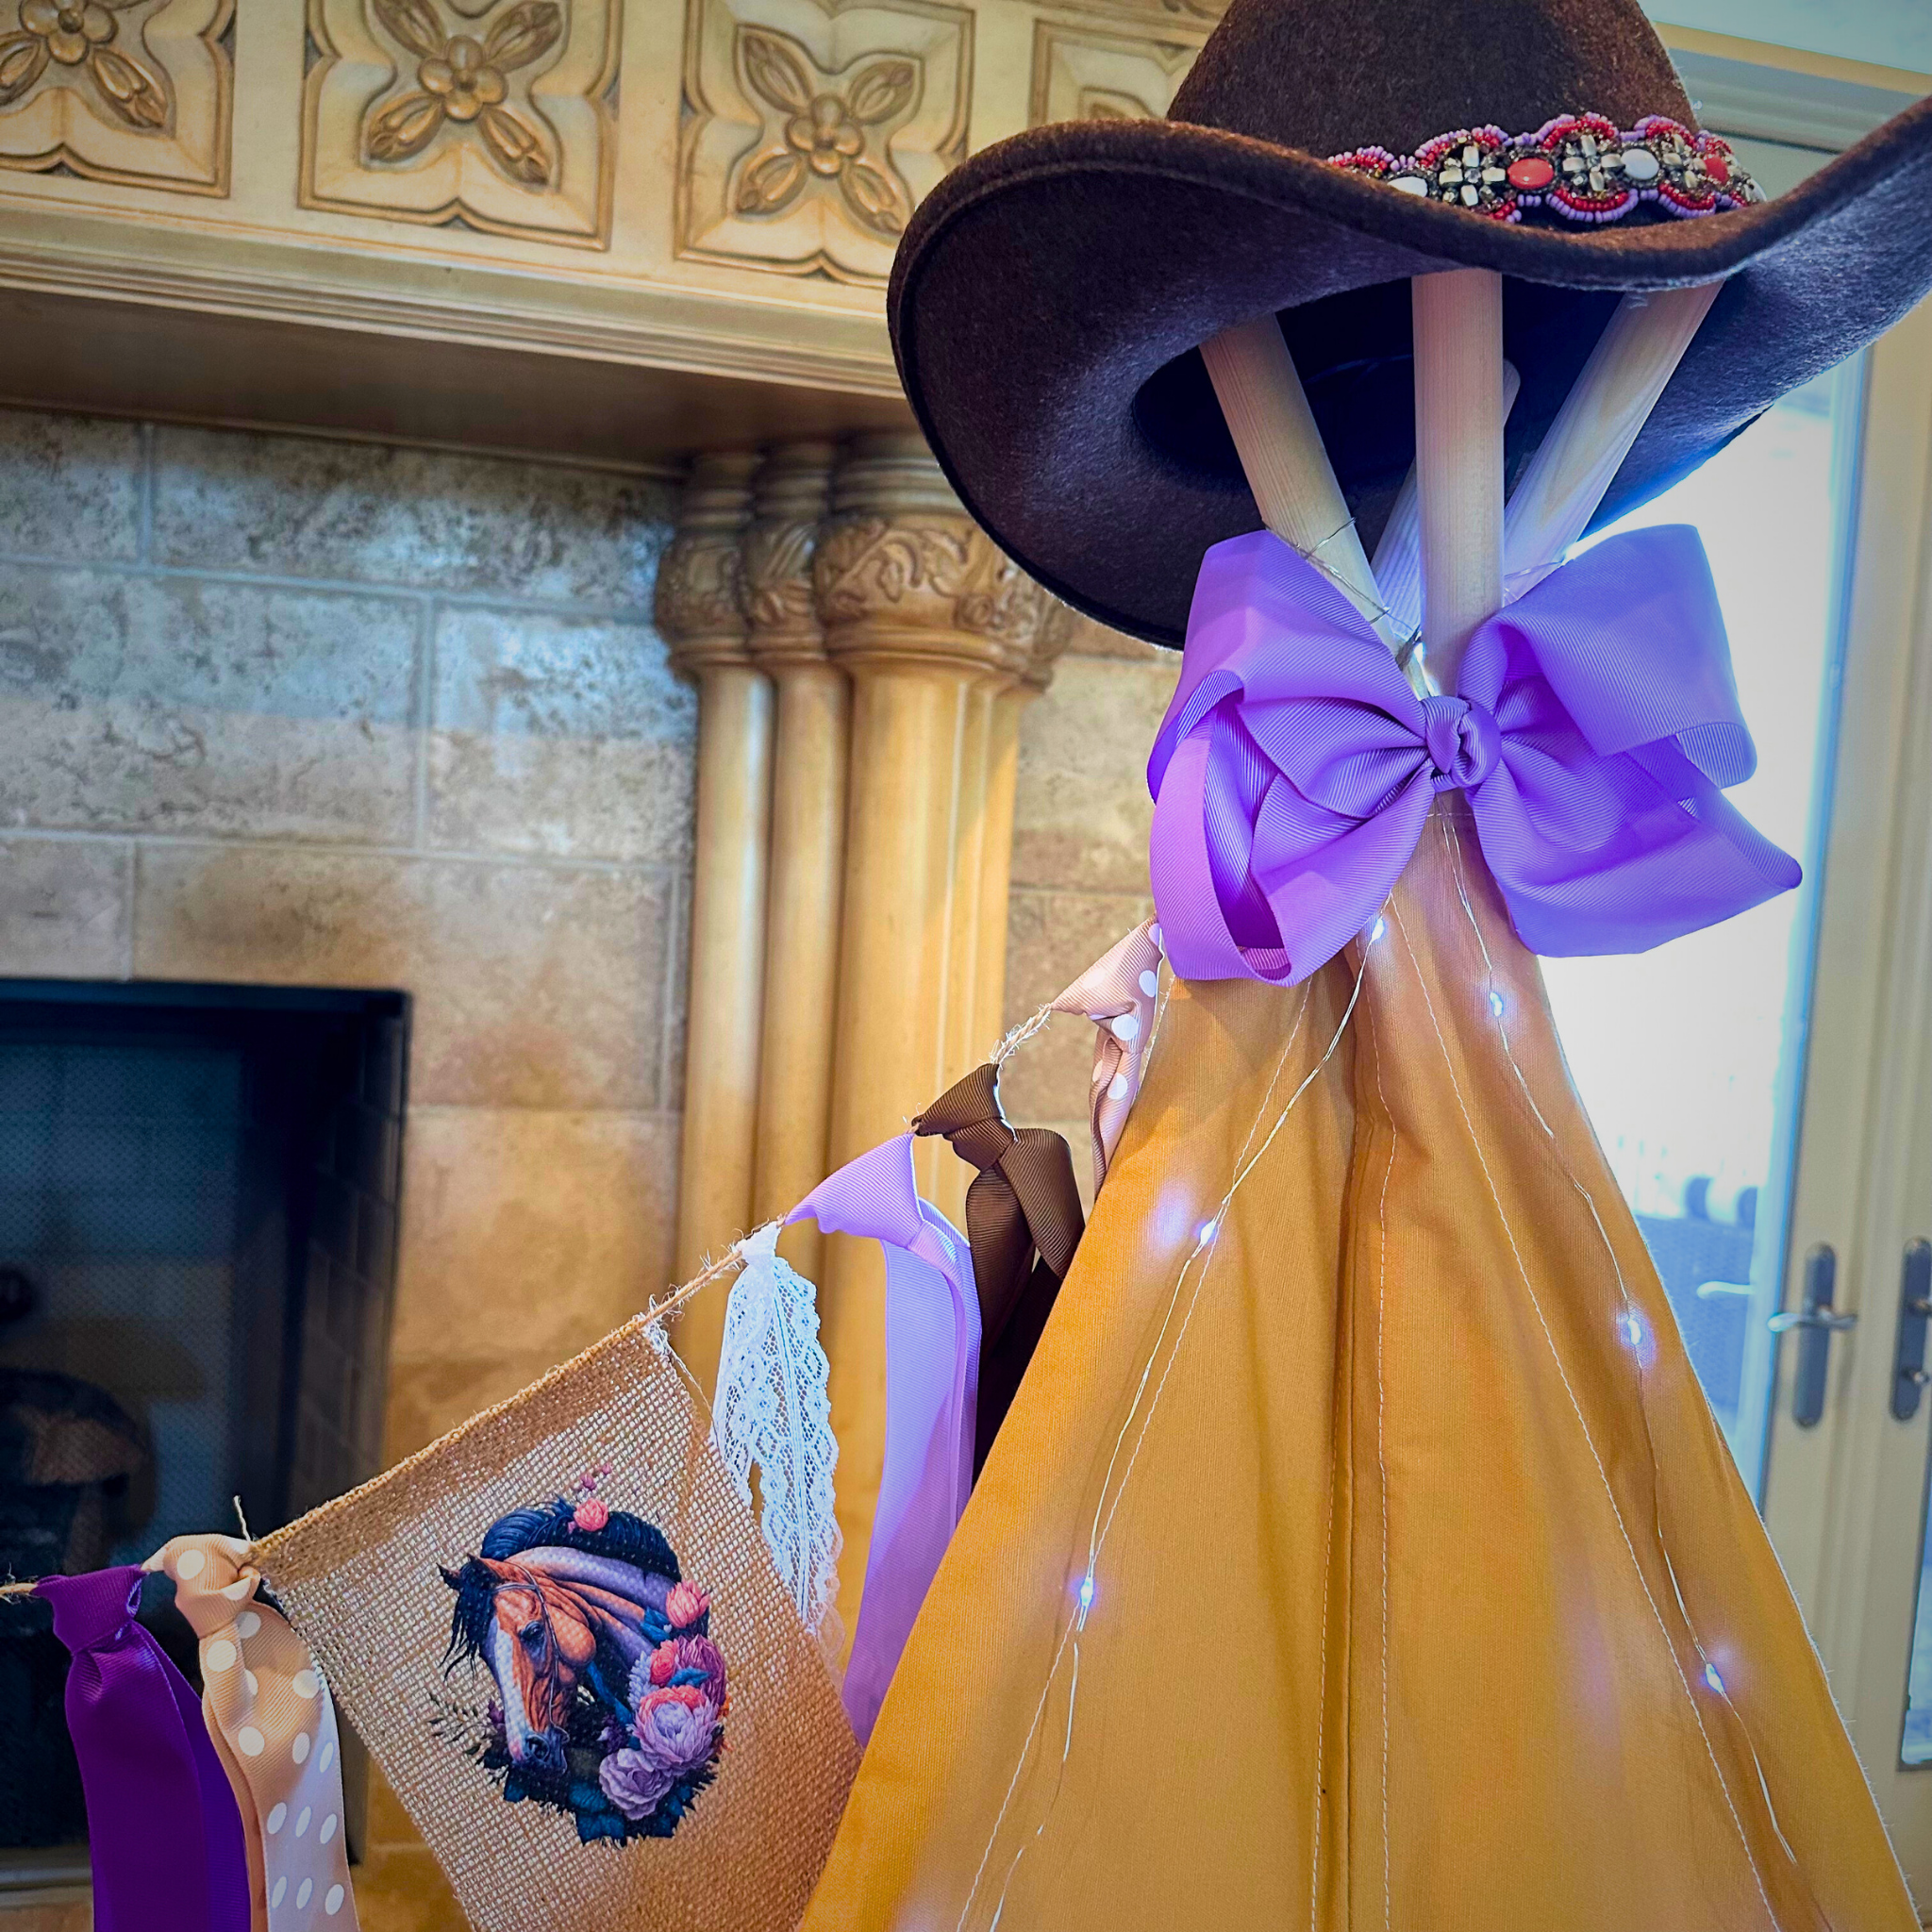 A cowboy party with decorations, cowboy hats and boots to create a great atmosphere for the guests